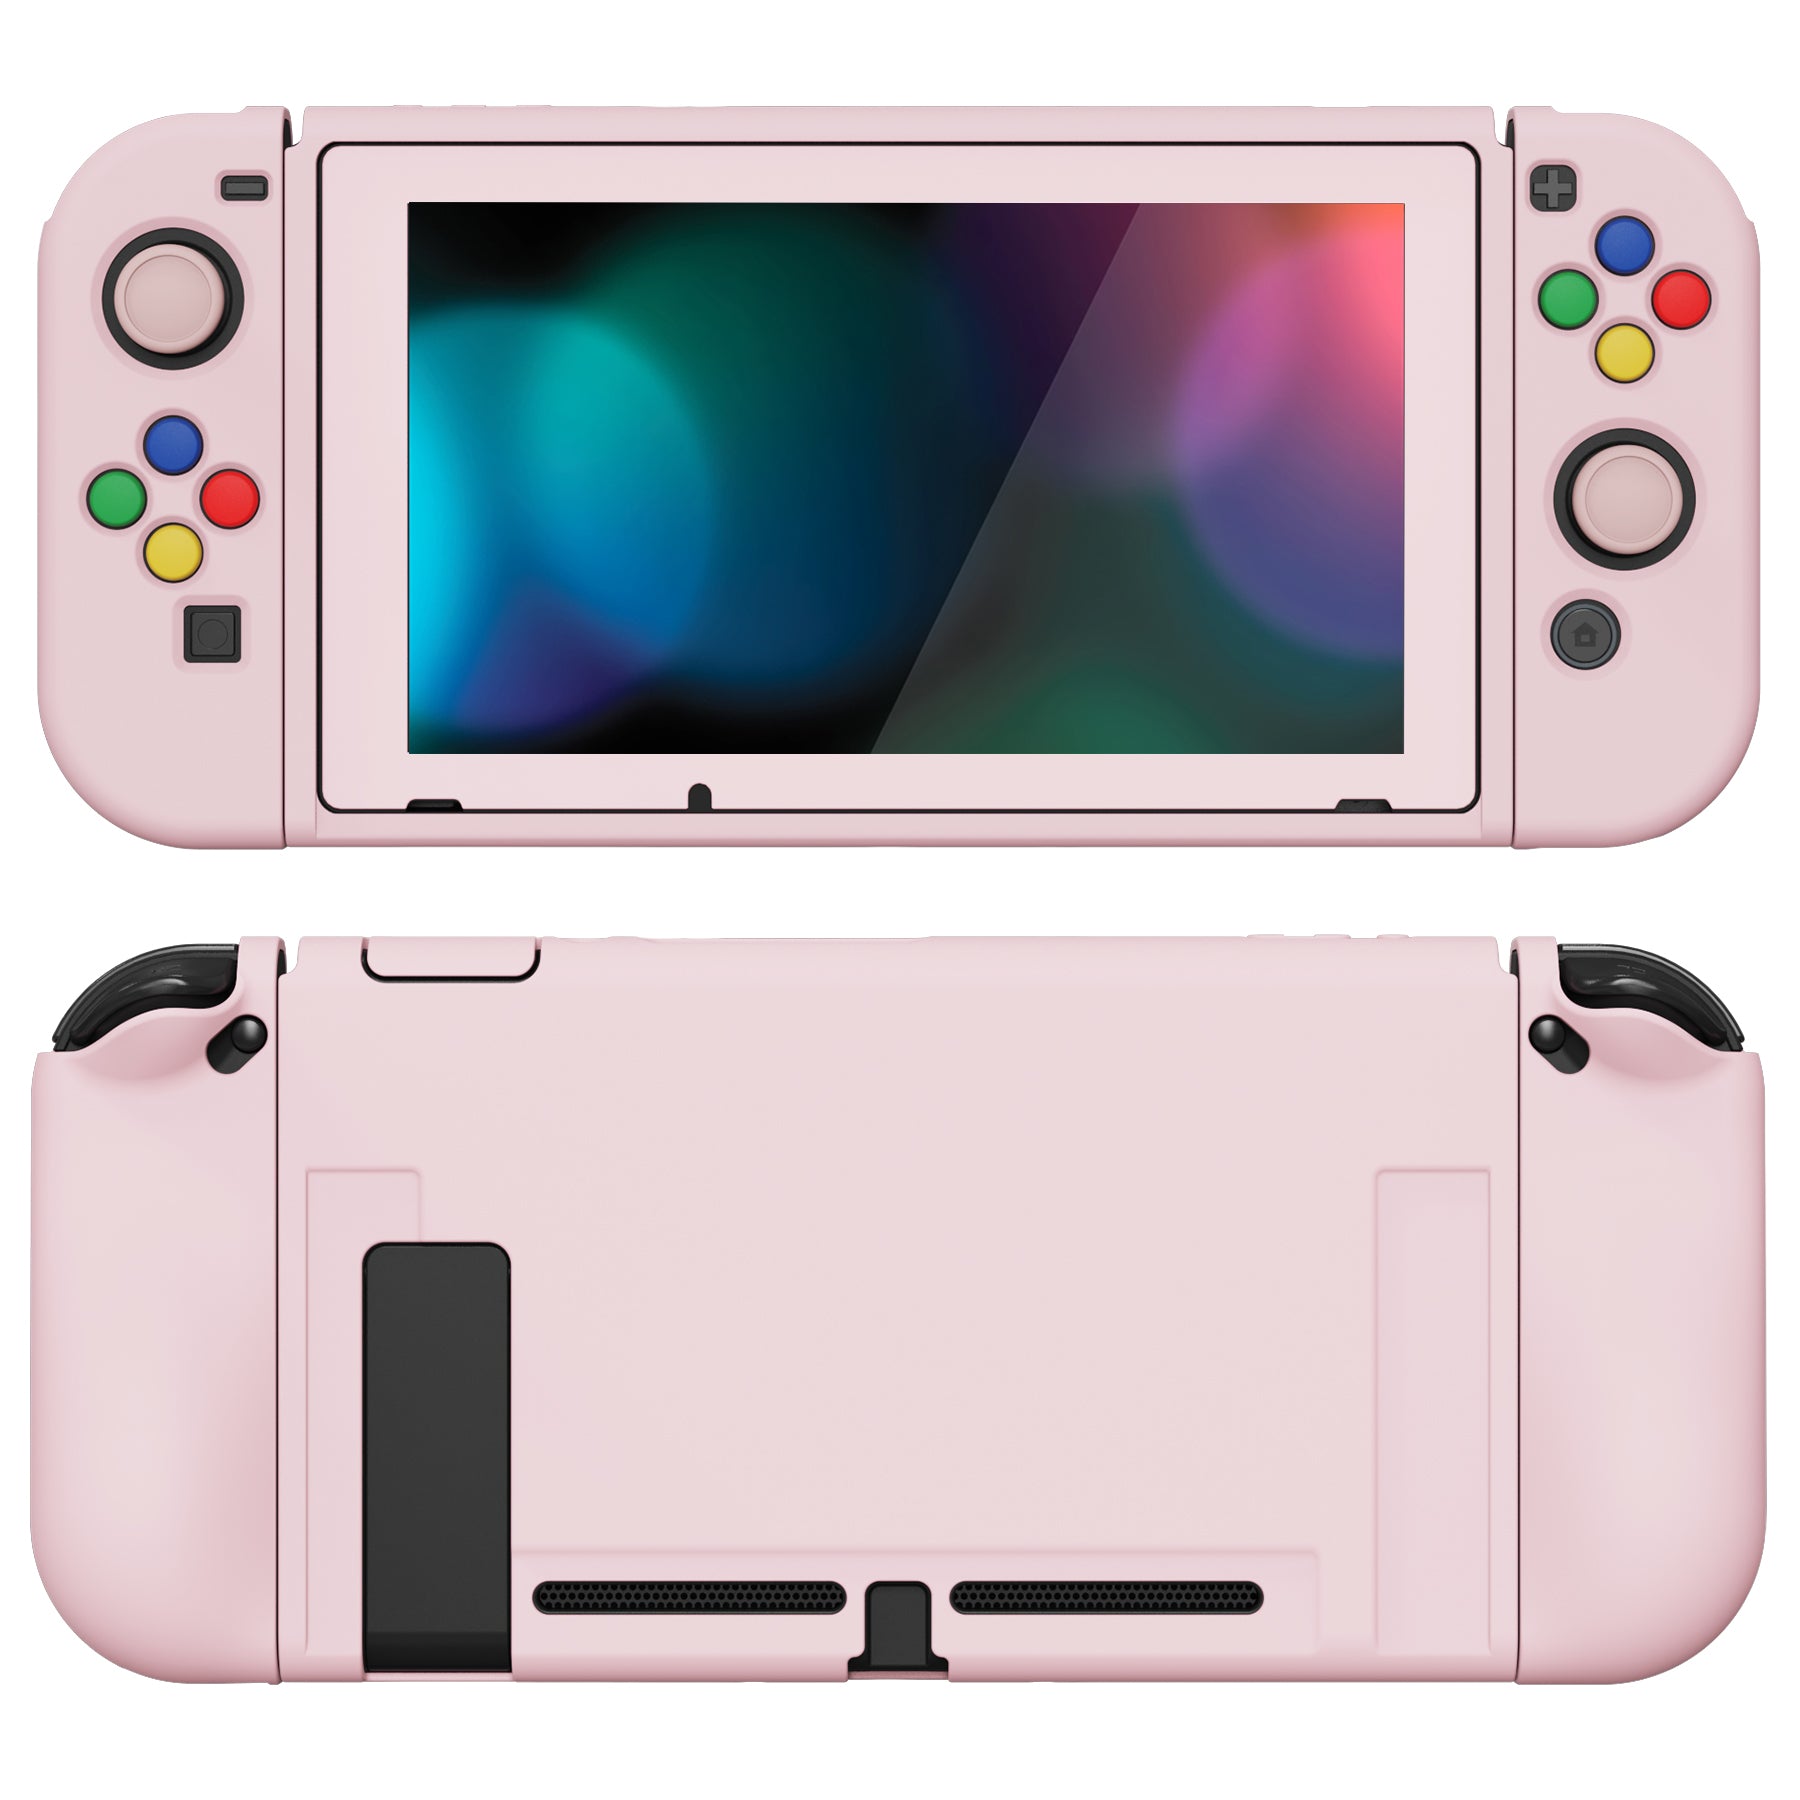 PlayVital ZealProtect Soft Protective Case for Nintendo Switch, Flexible Cover for Switch with Tempered Glass Screen Protector & Thumb Grips & ABXY Direction Button Caps - Cherry Blossoms Pink - RNSYM5002